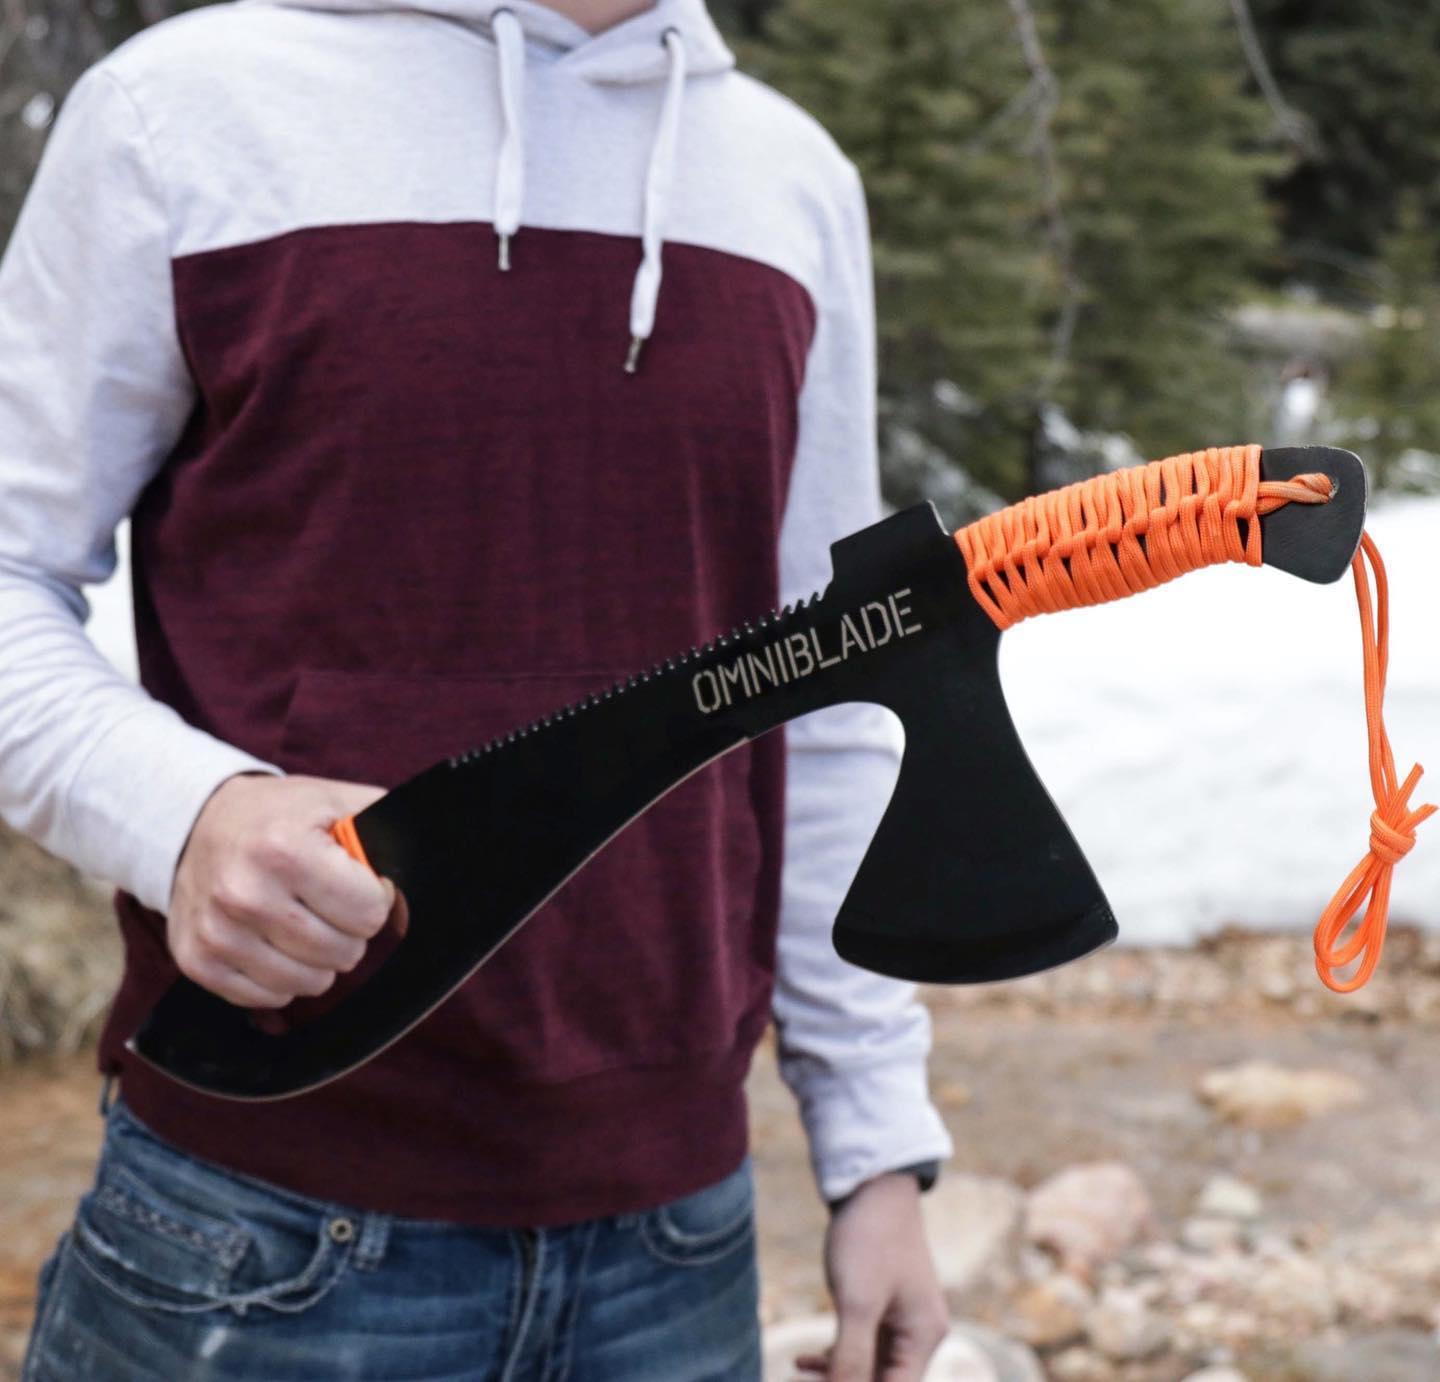 Omniblade 3-in-1 Survival Machete Includes a Knife, Tactical Tomahawk, and a Survival Saw - Giant machete multi-tool